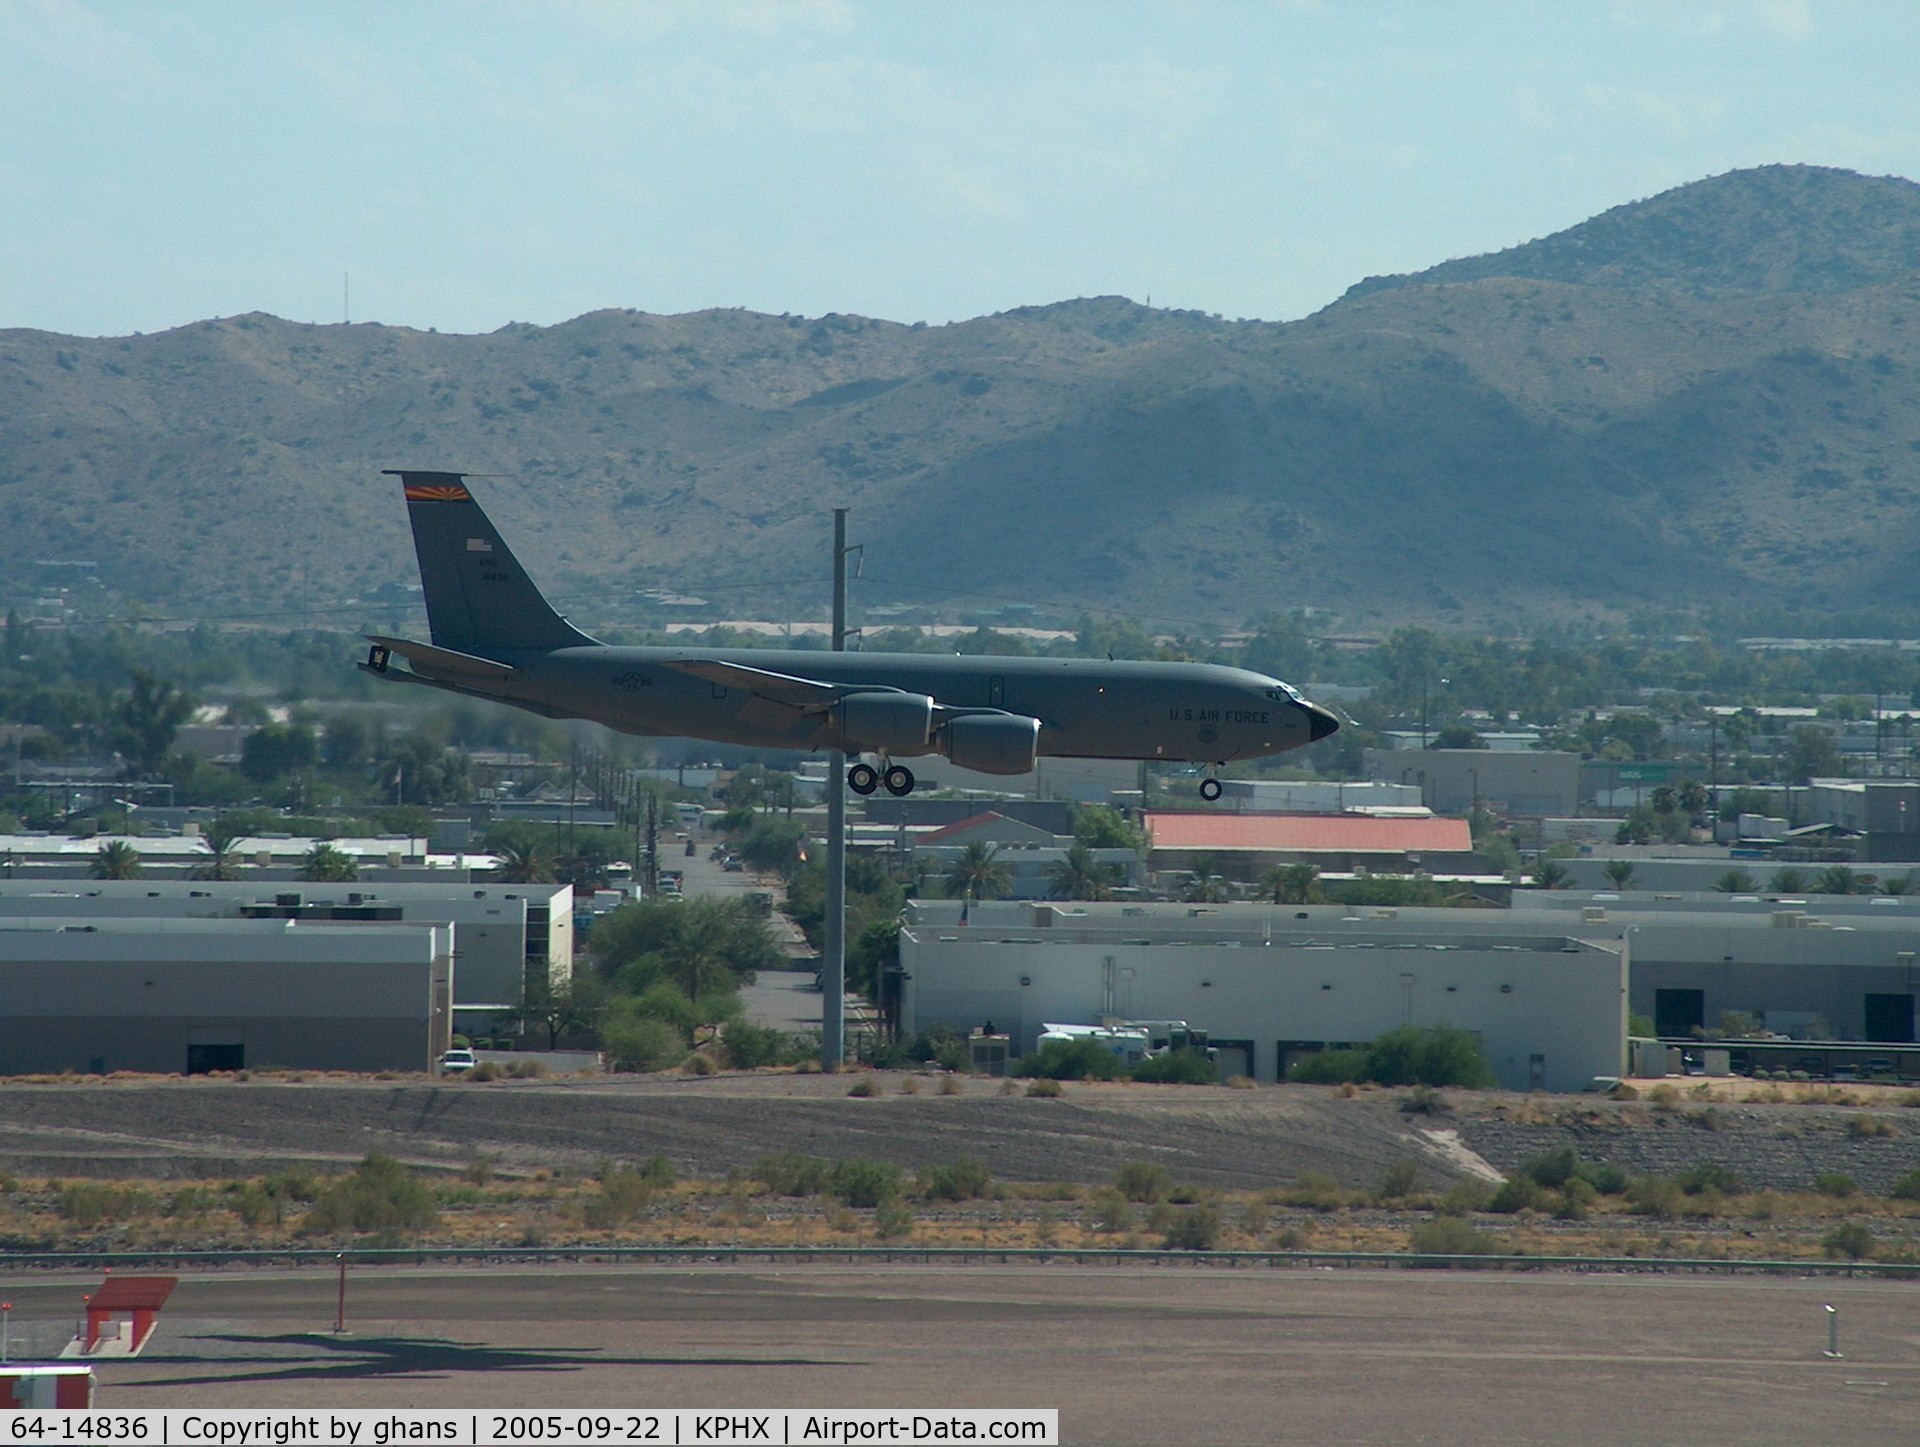 64-14836, 1964 Boeing KC-135R Stratotanker C/N 18776, Landing at Phoenix with the mountains in the bachground.